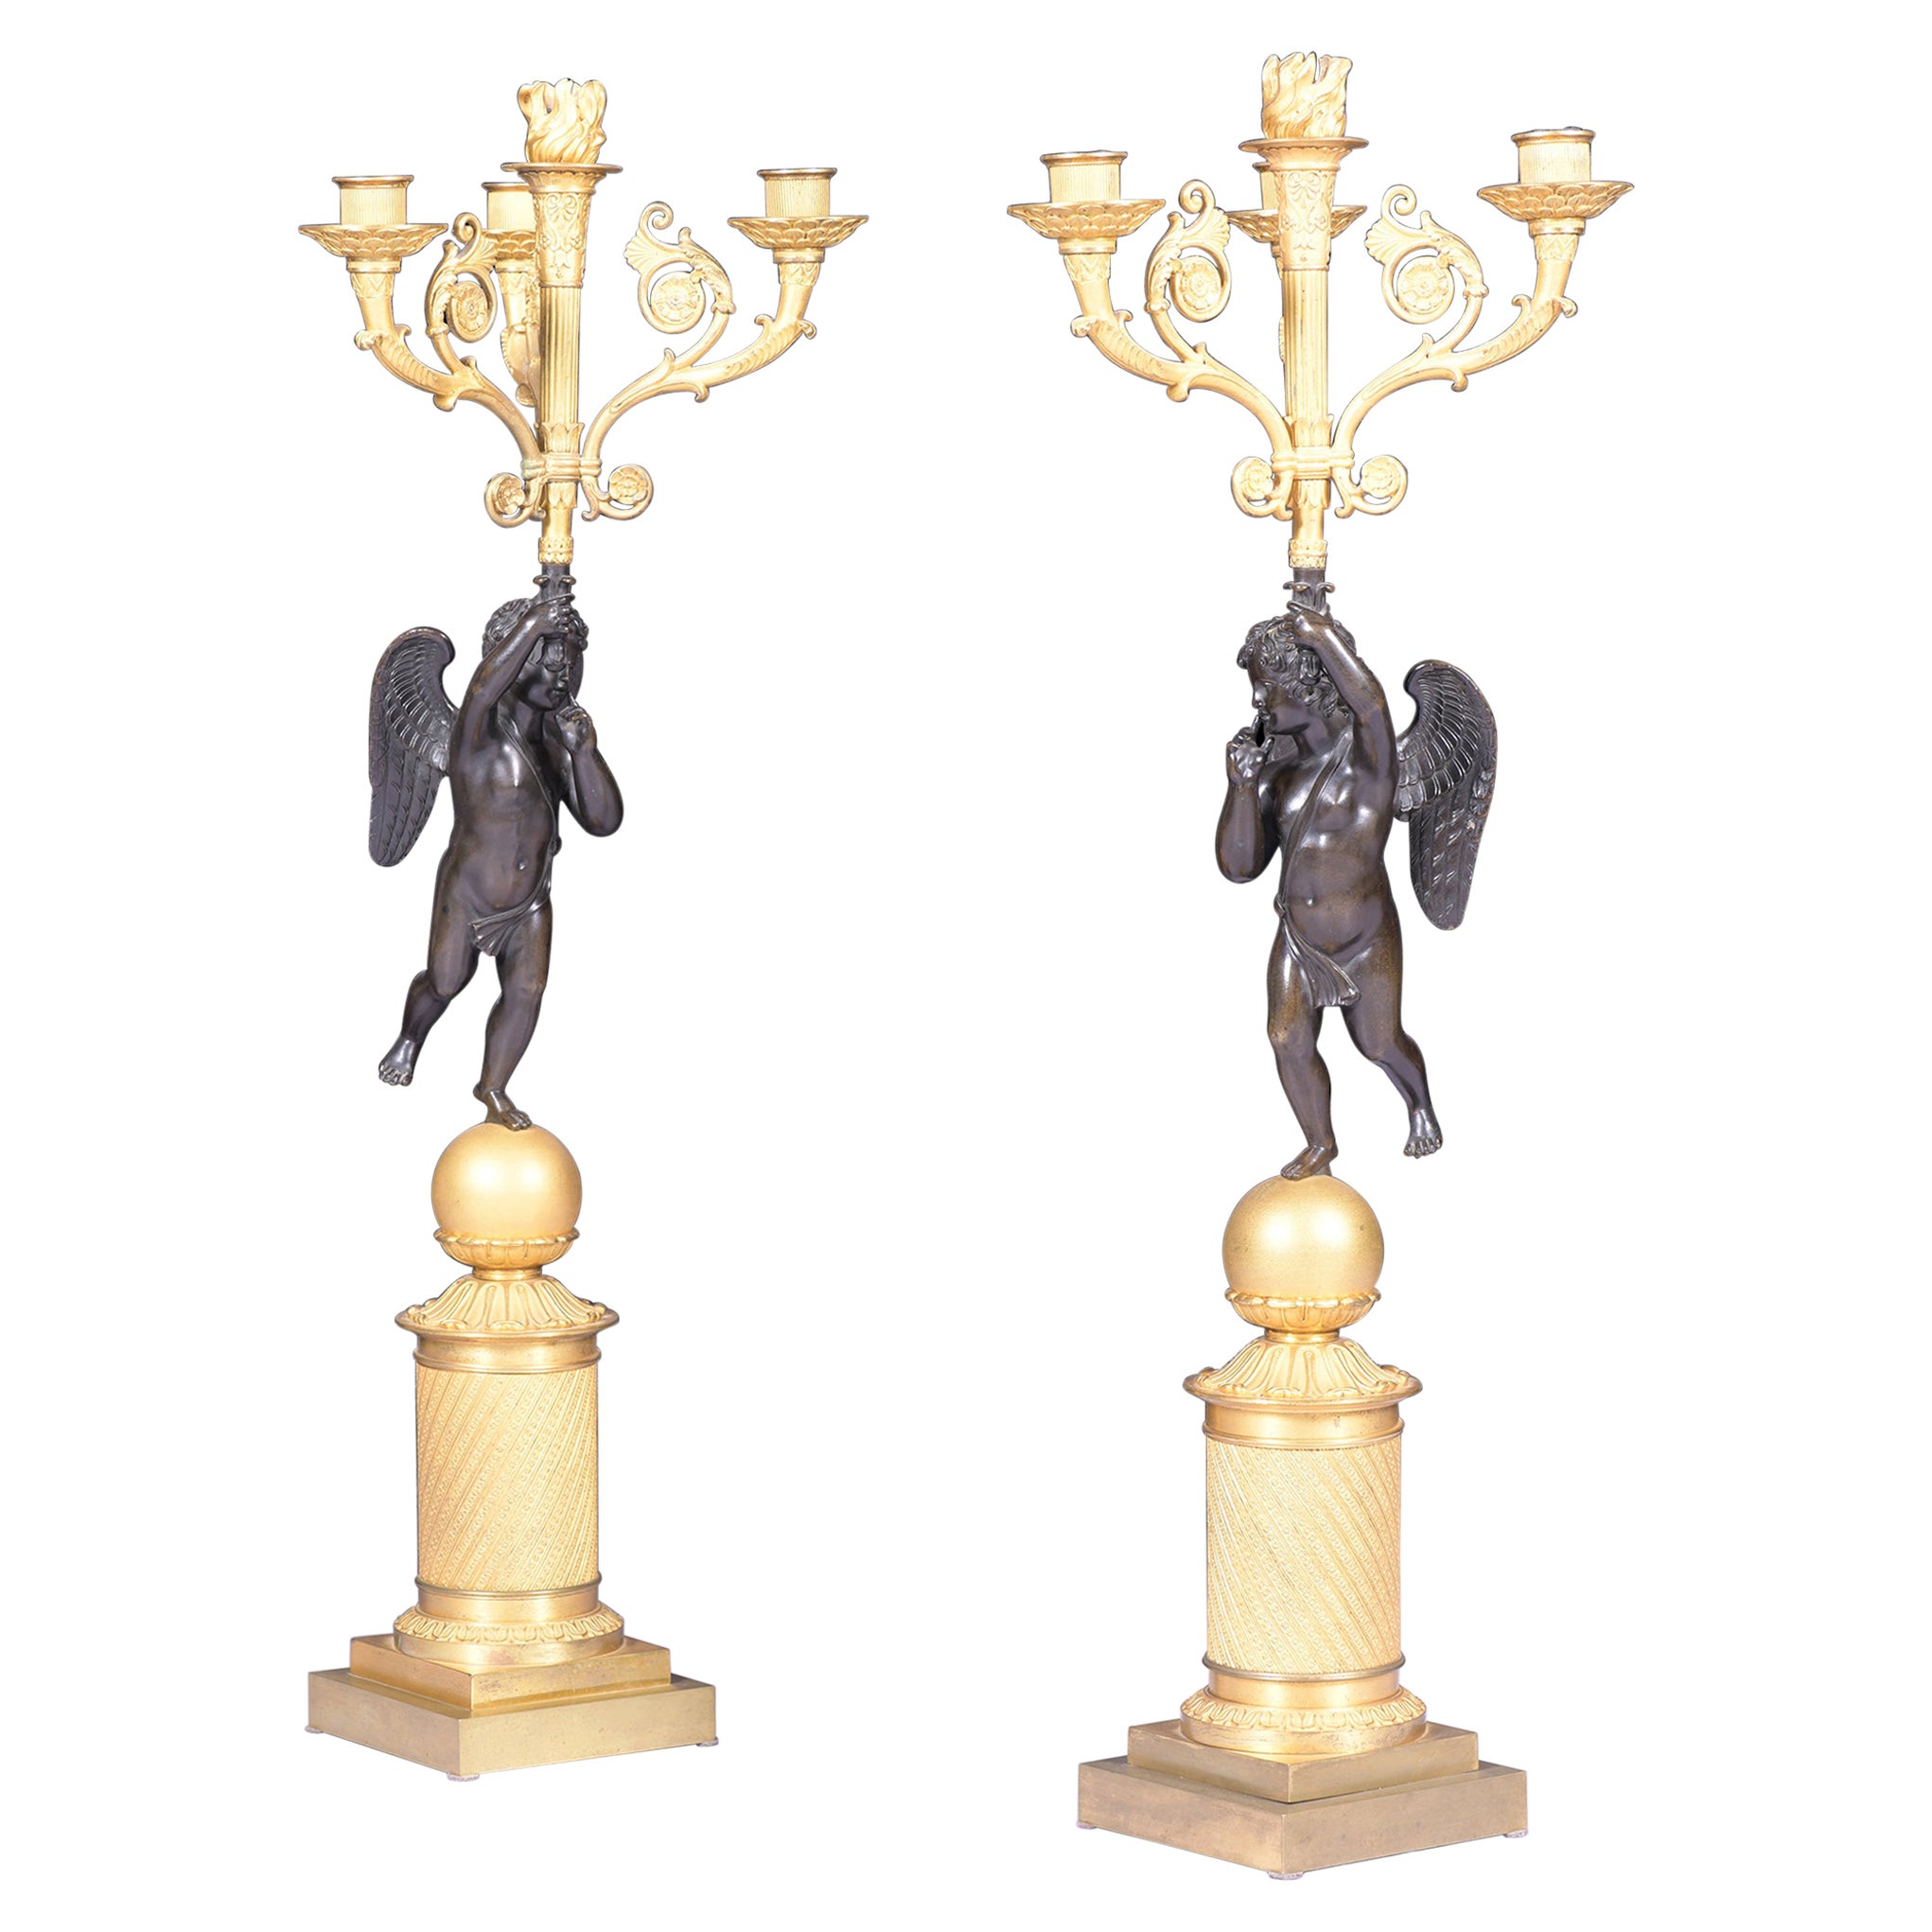 Pair of Early 19th Century French Ormolu & Bronze Empire Period Candelabra For Sale